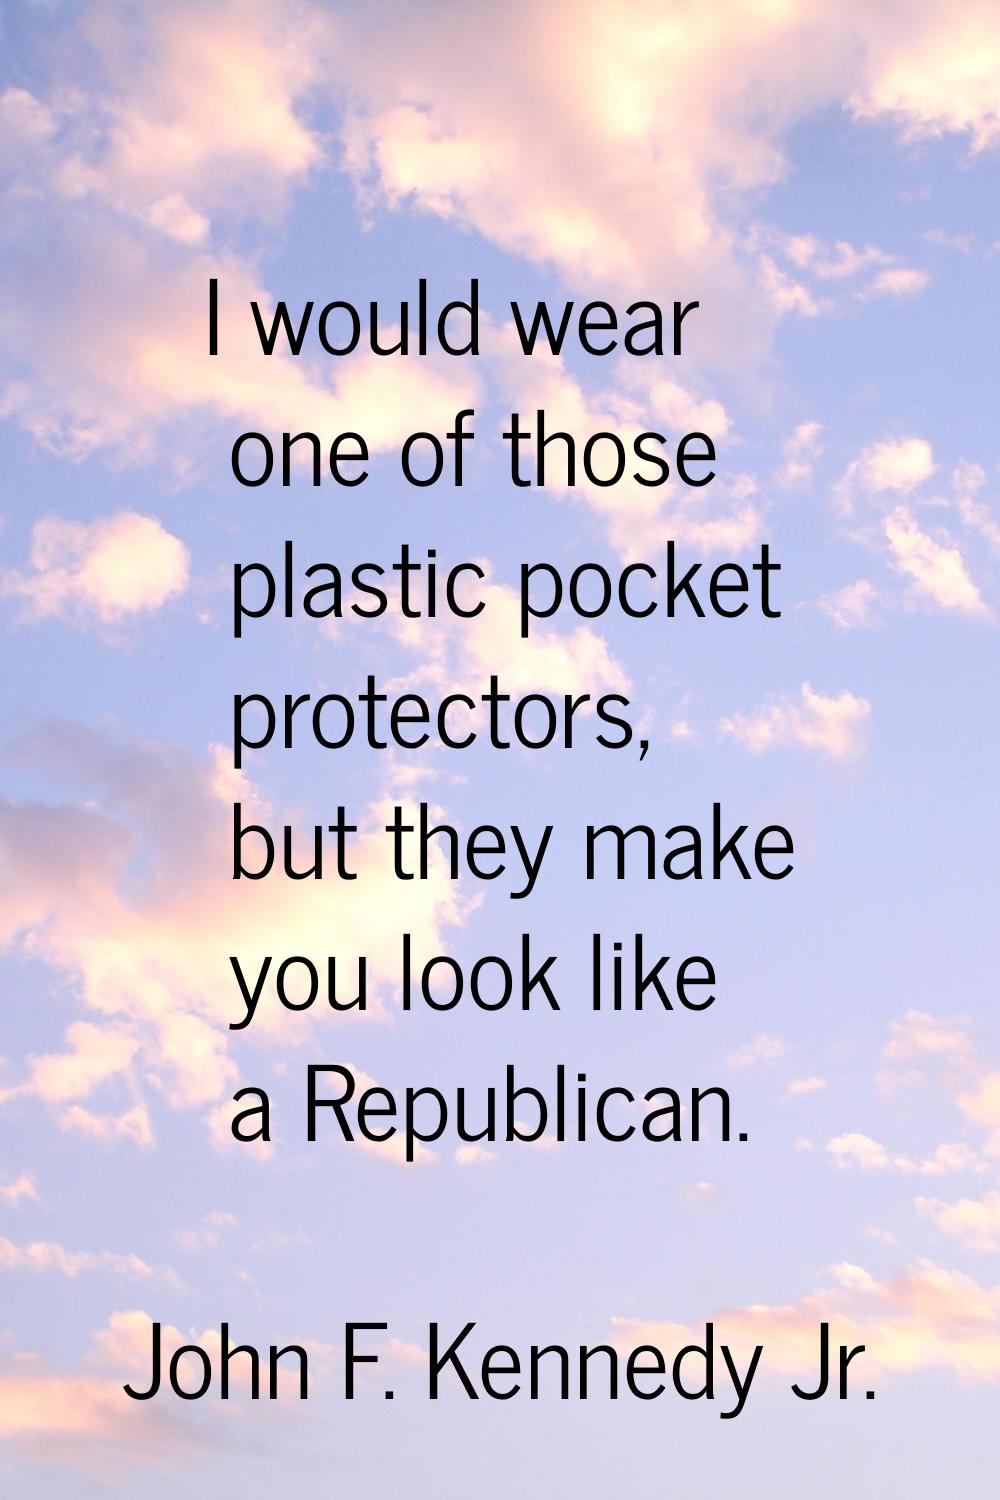 I would wear one of those plastic pocket protectors, but they make you look like a Republican.